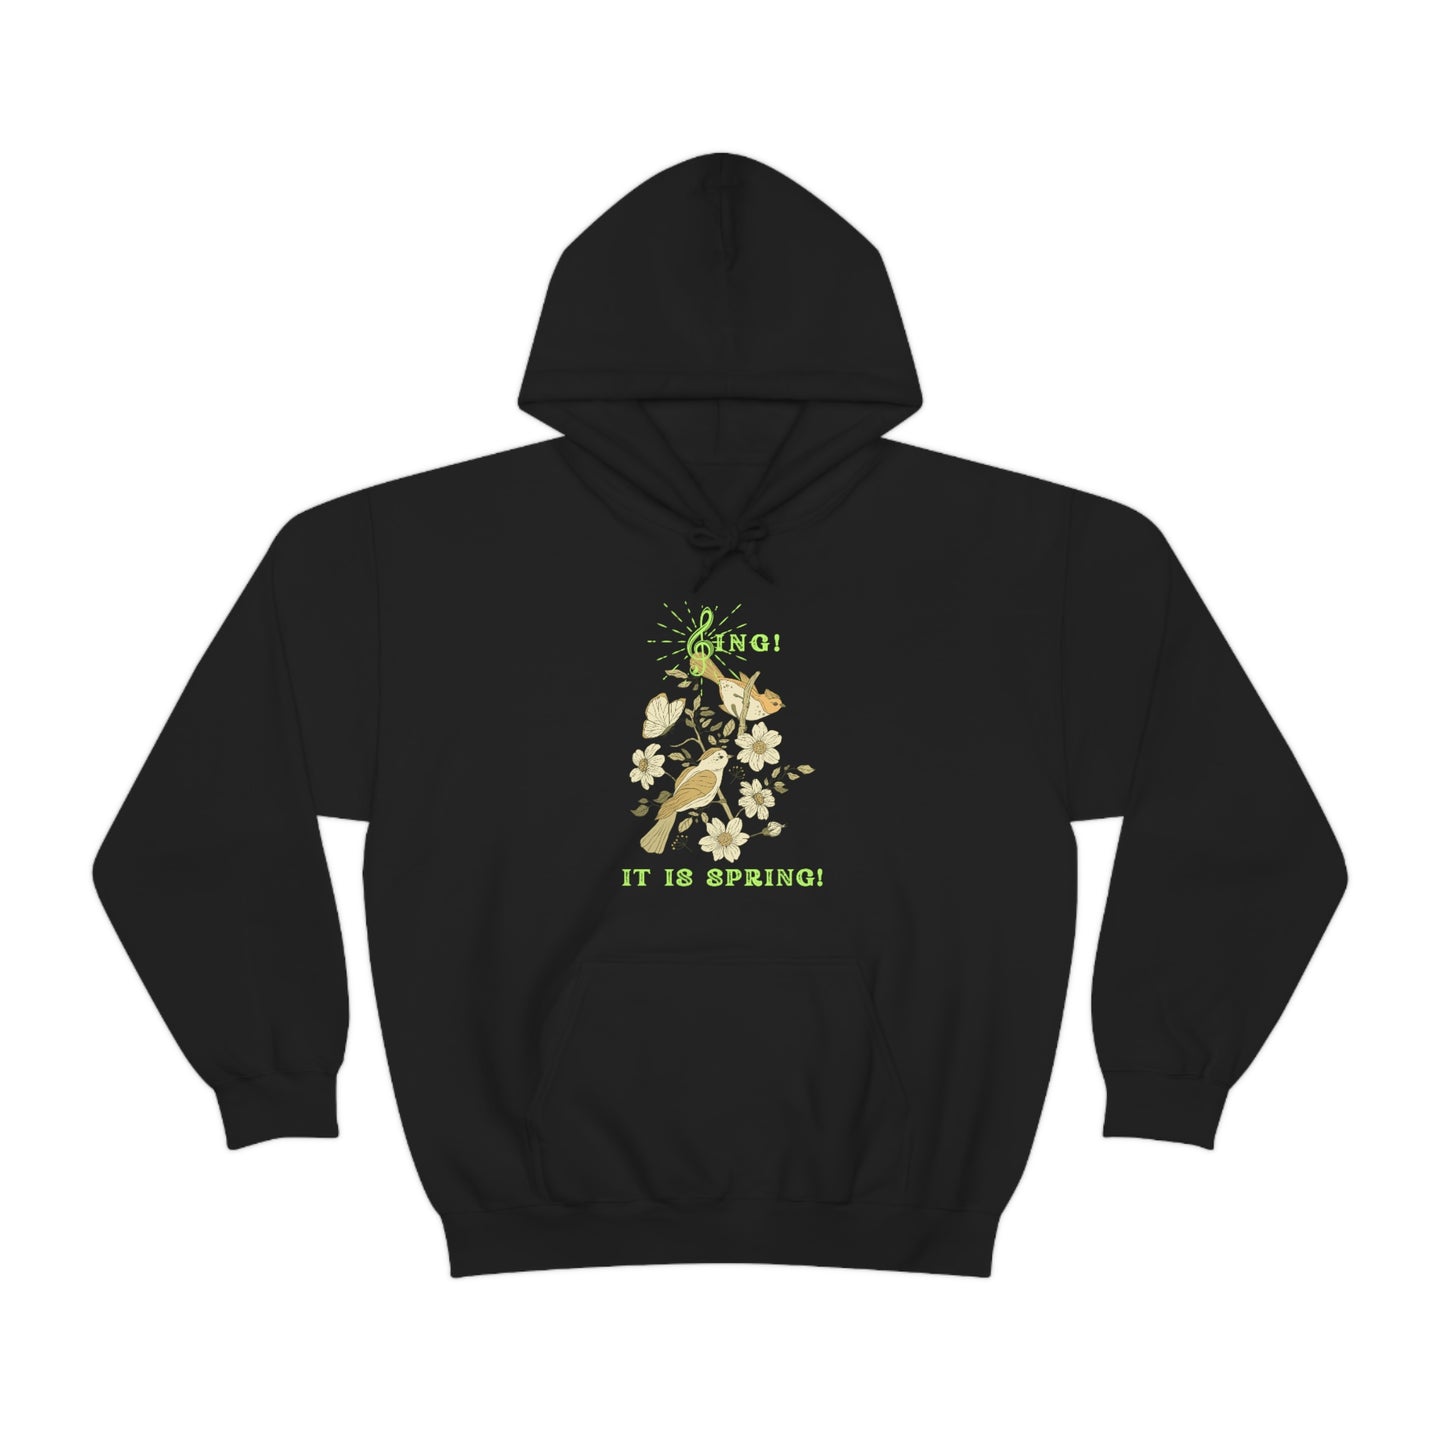 SING THIS IS SPRING UNISEX HOODIE  GIFT WITH GREEN FONT